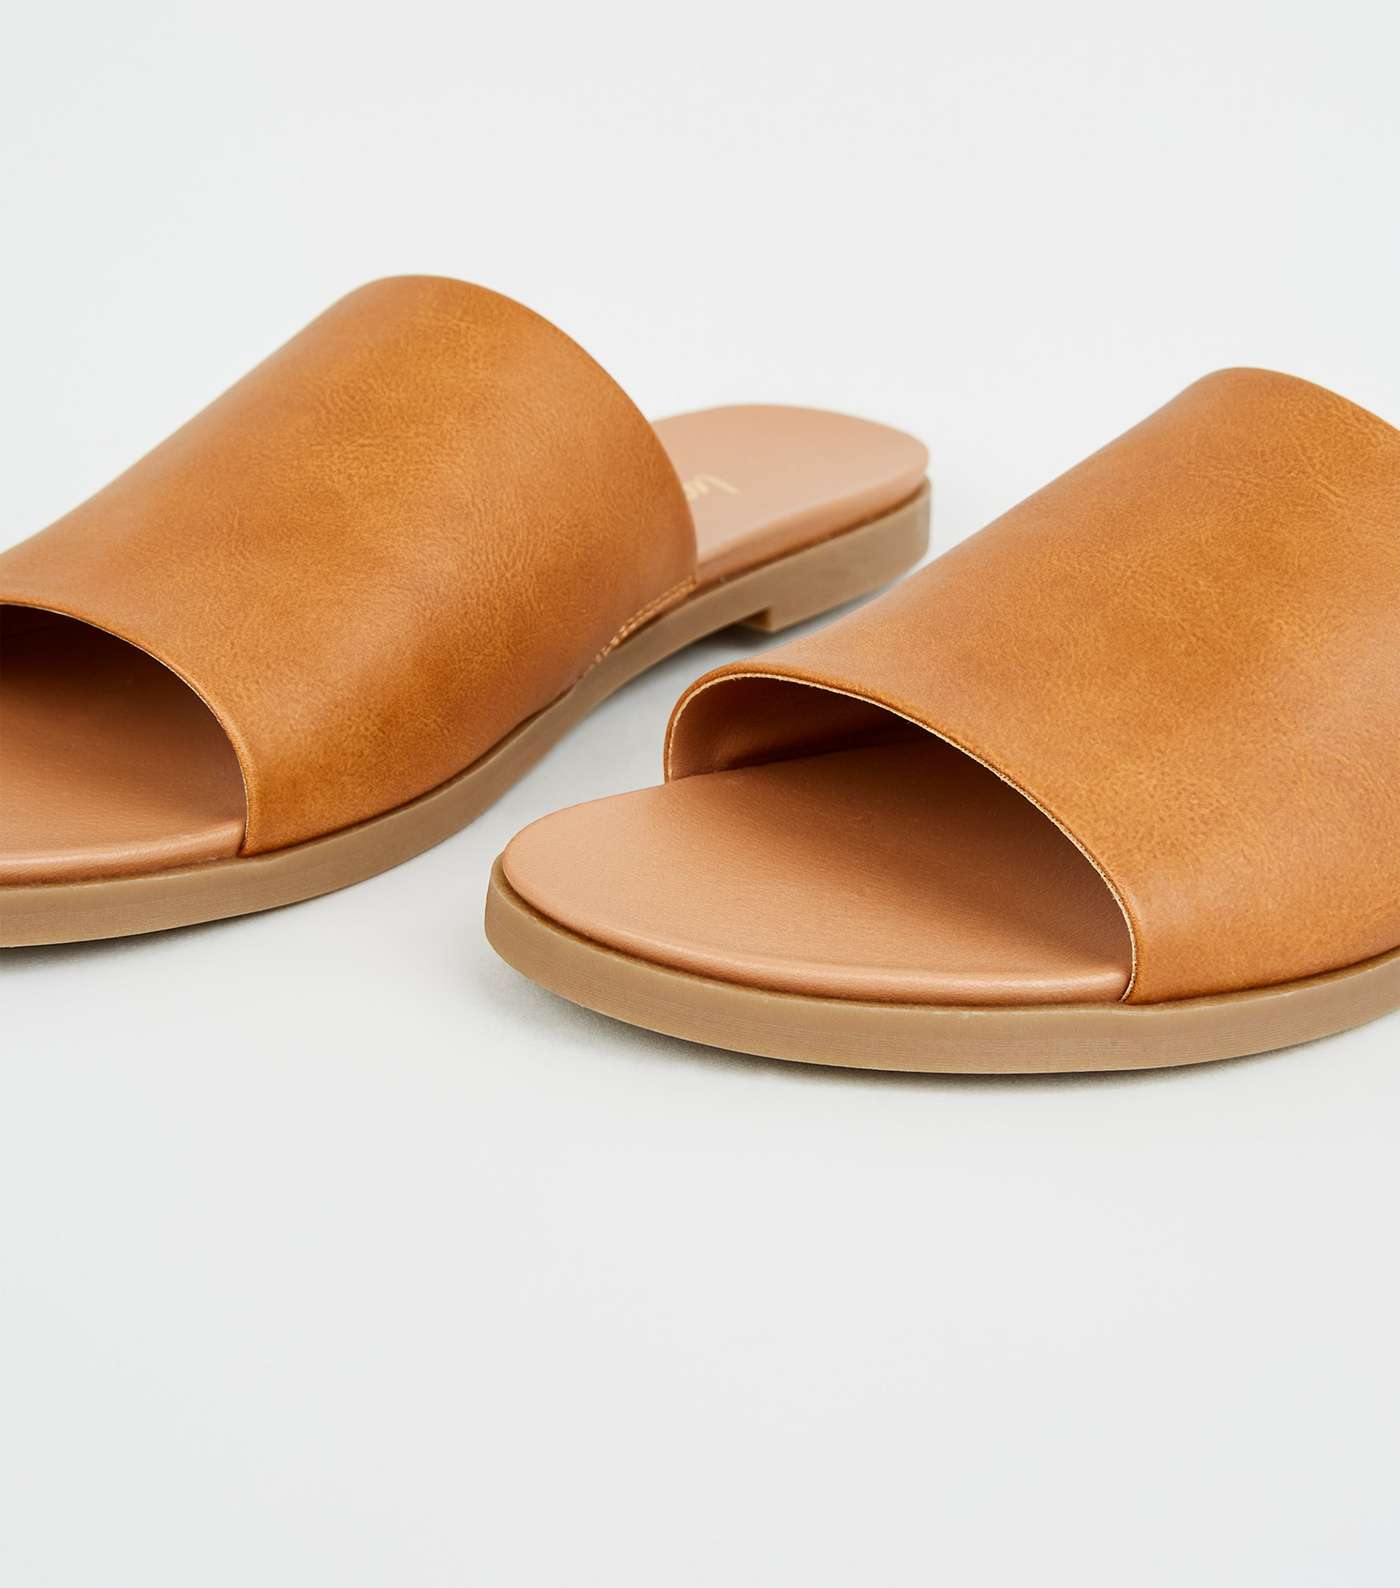 Tan Leather-Look Strap Footbed Sliders Image 3